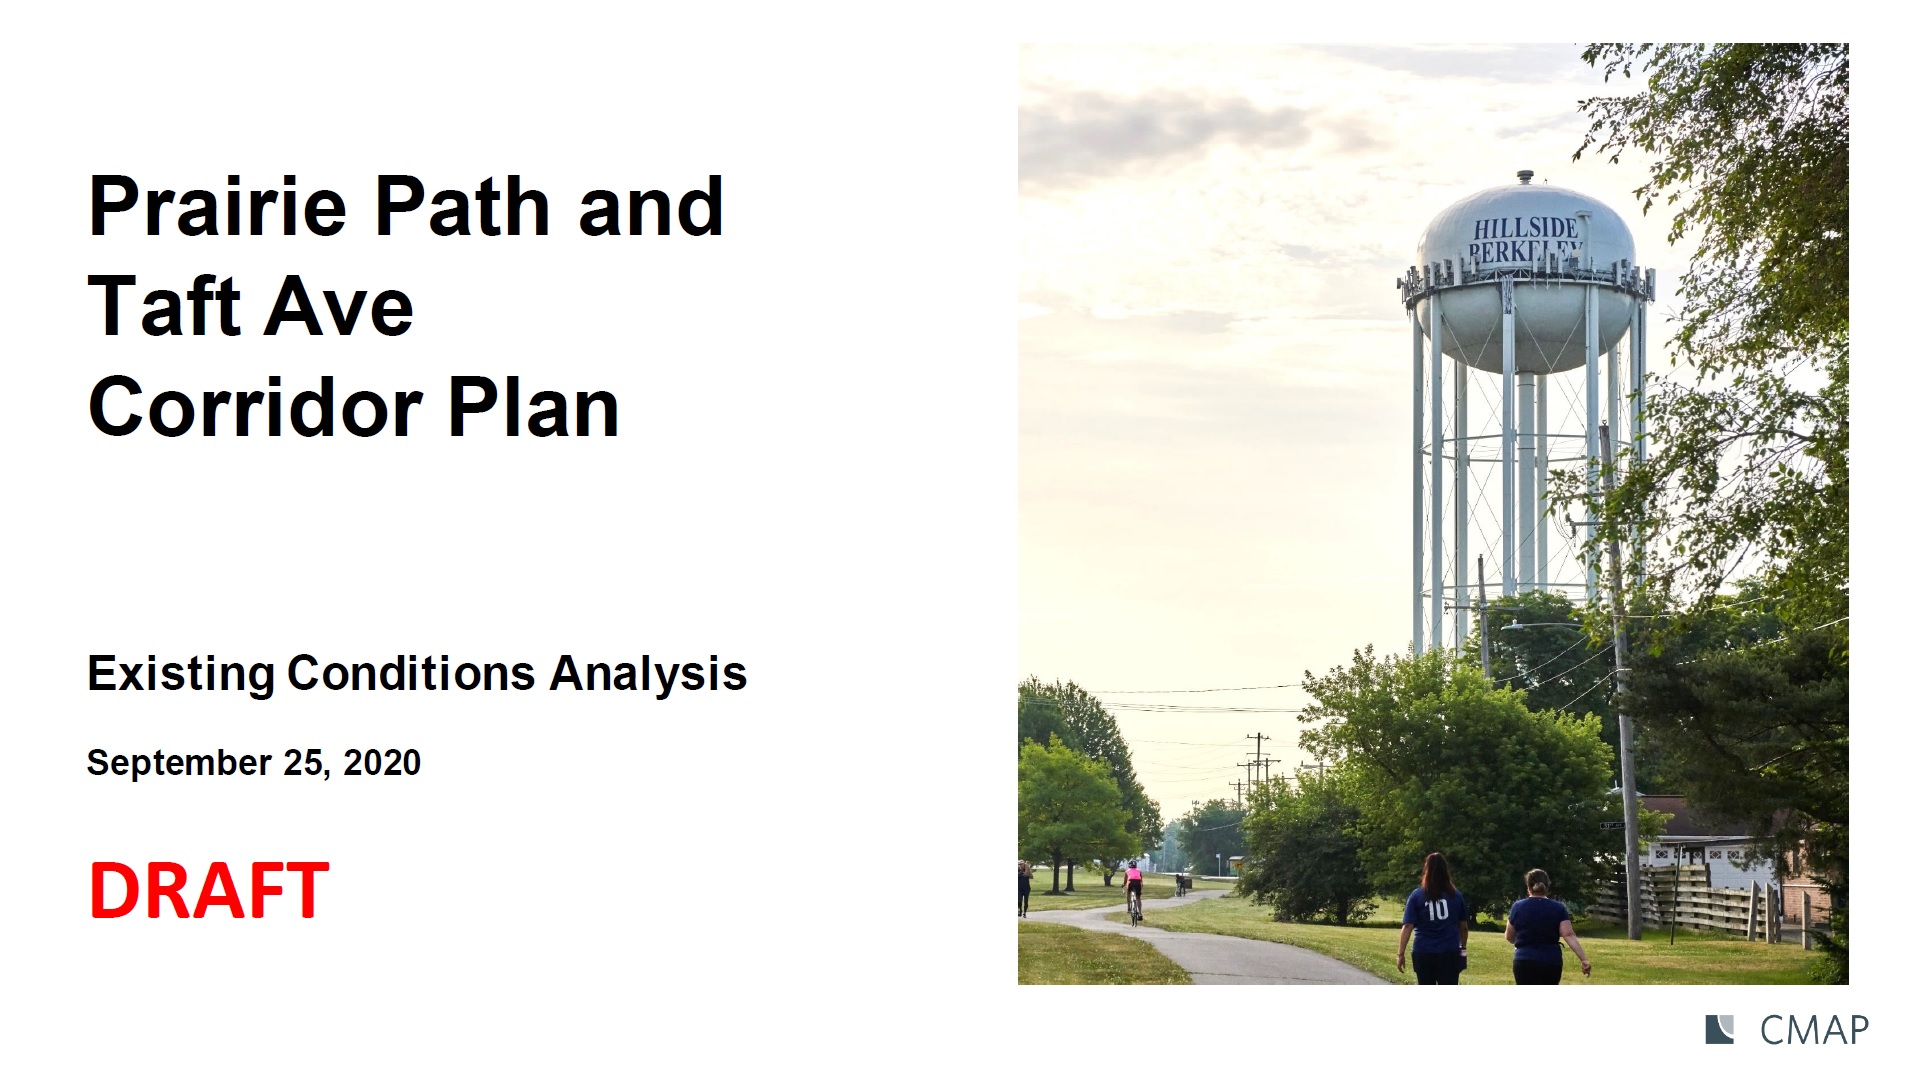 Prairie Path and Taft Avenue Corridor Plan Existing Conditions Analysis font cover